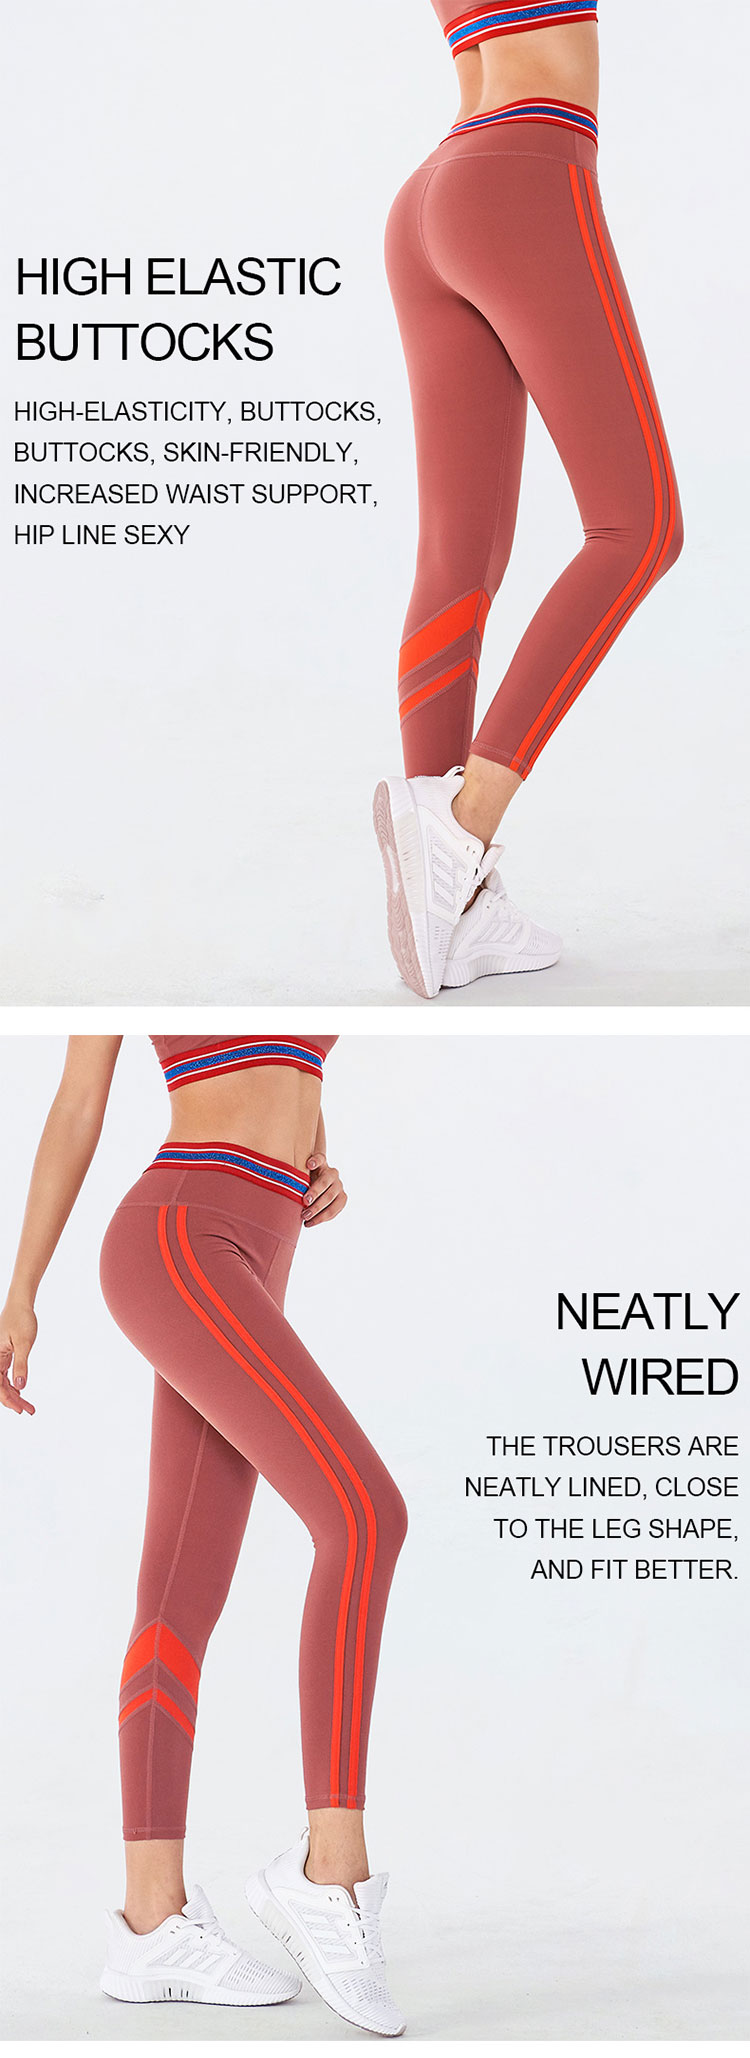 Elastic-waist-the-waist-is-elastically-designed-to-be-elastic-not-tight.-strong-rebound-ability